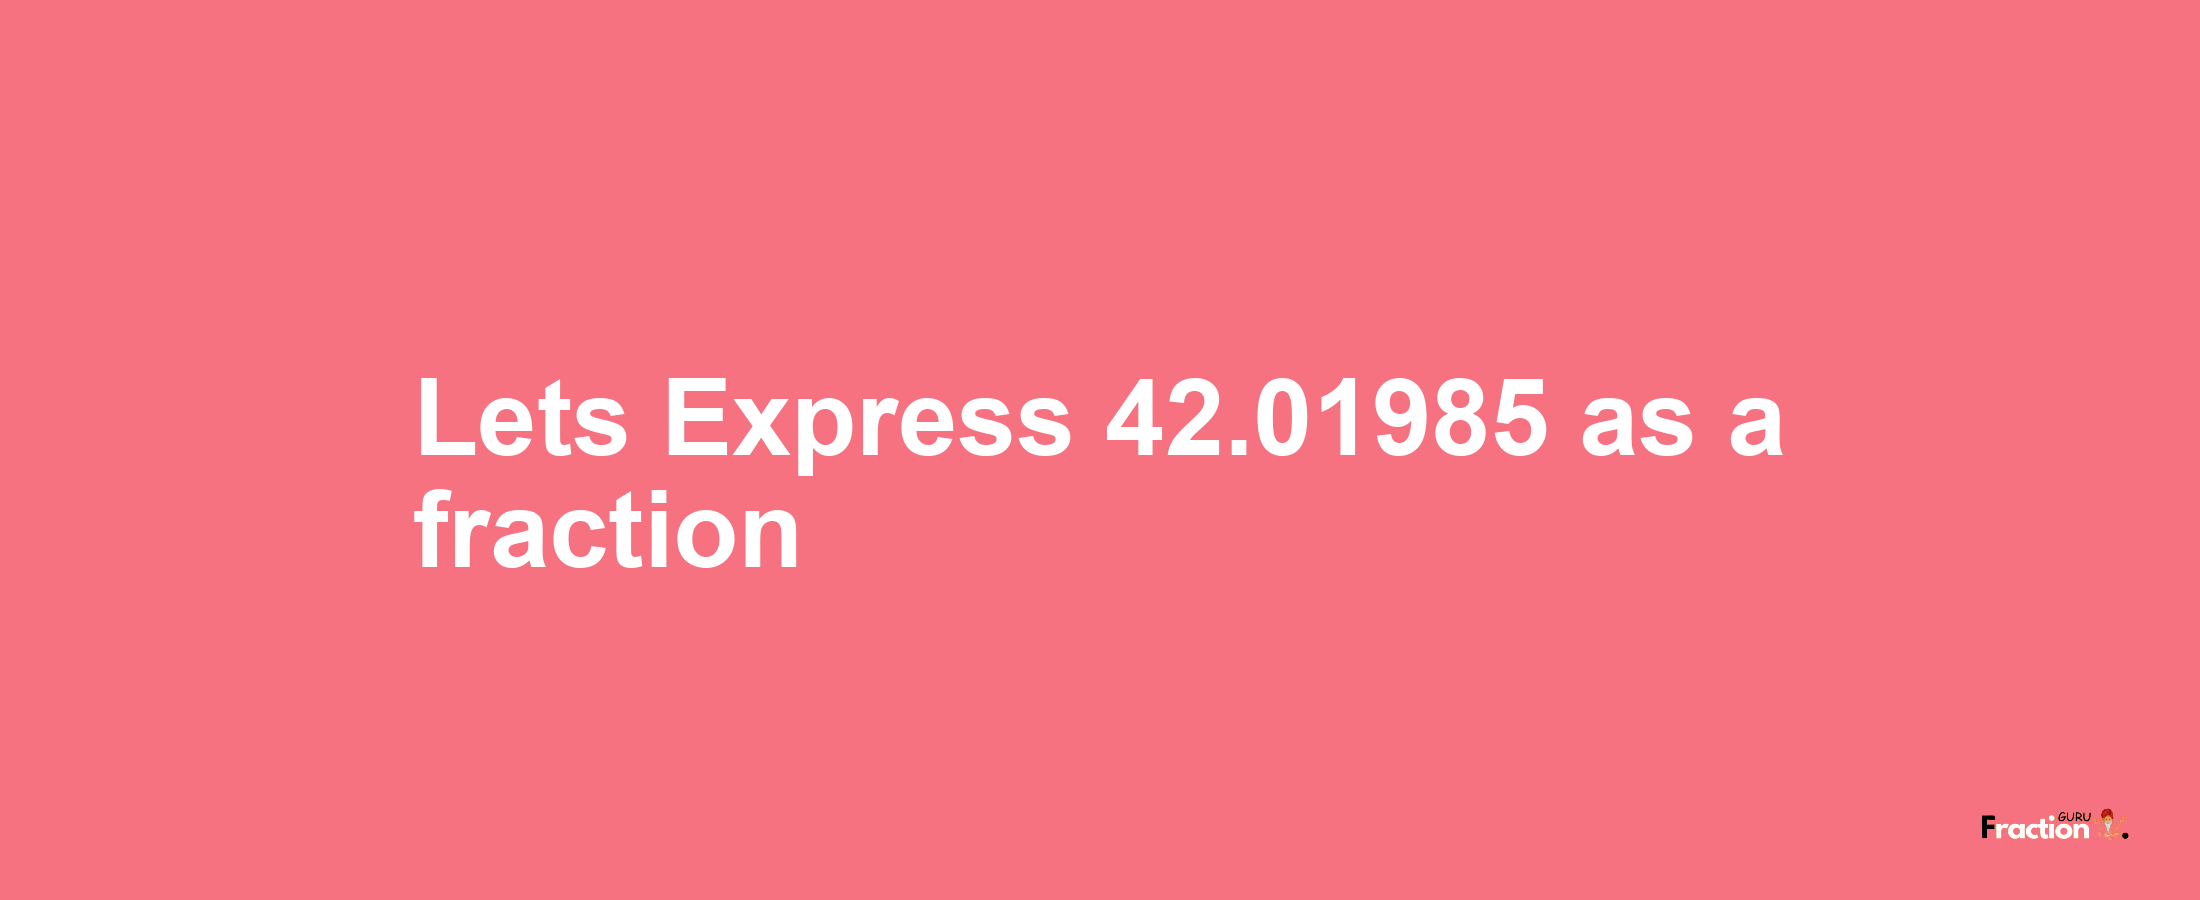 Lets Express 42.01985 as afraction